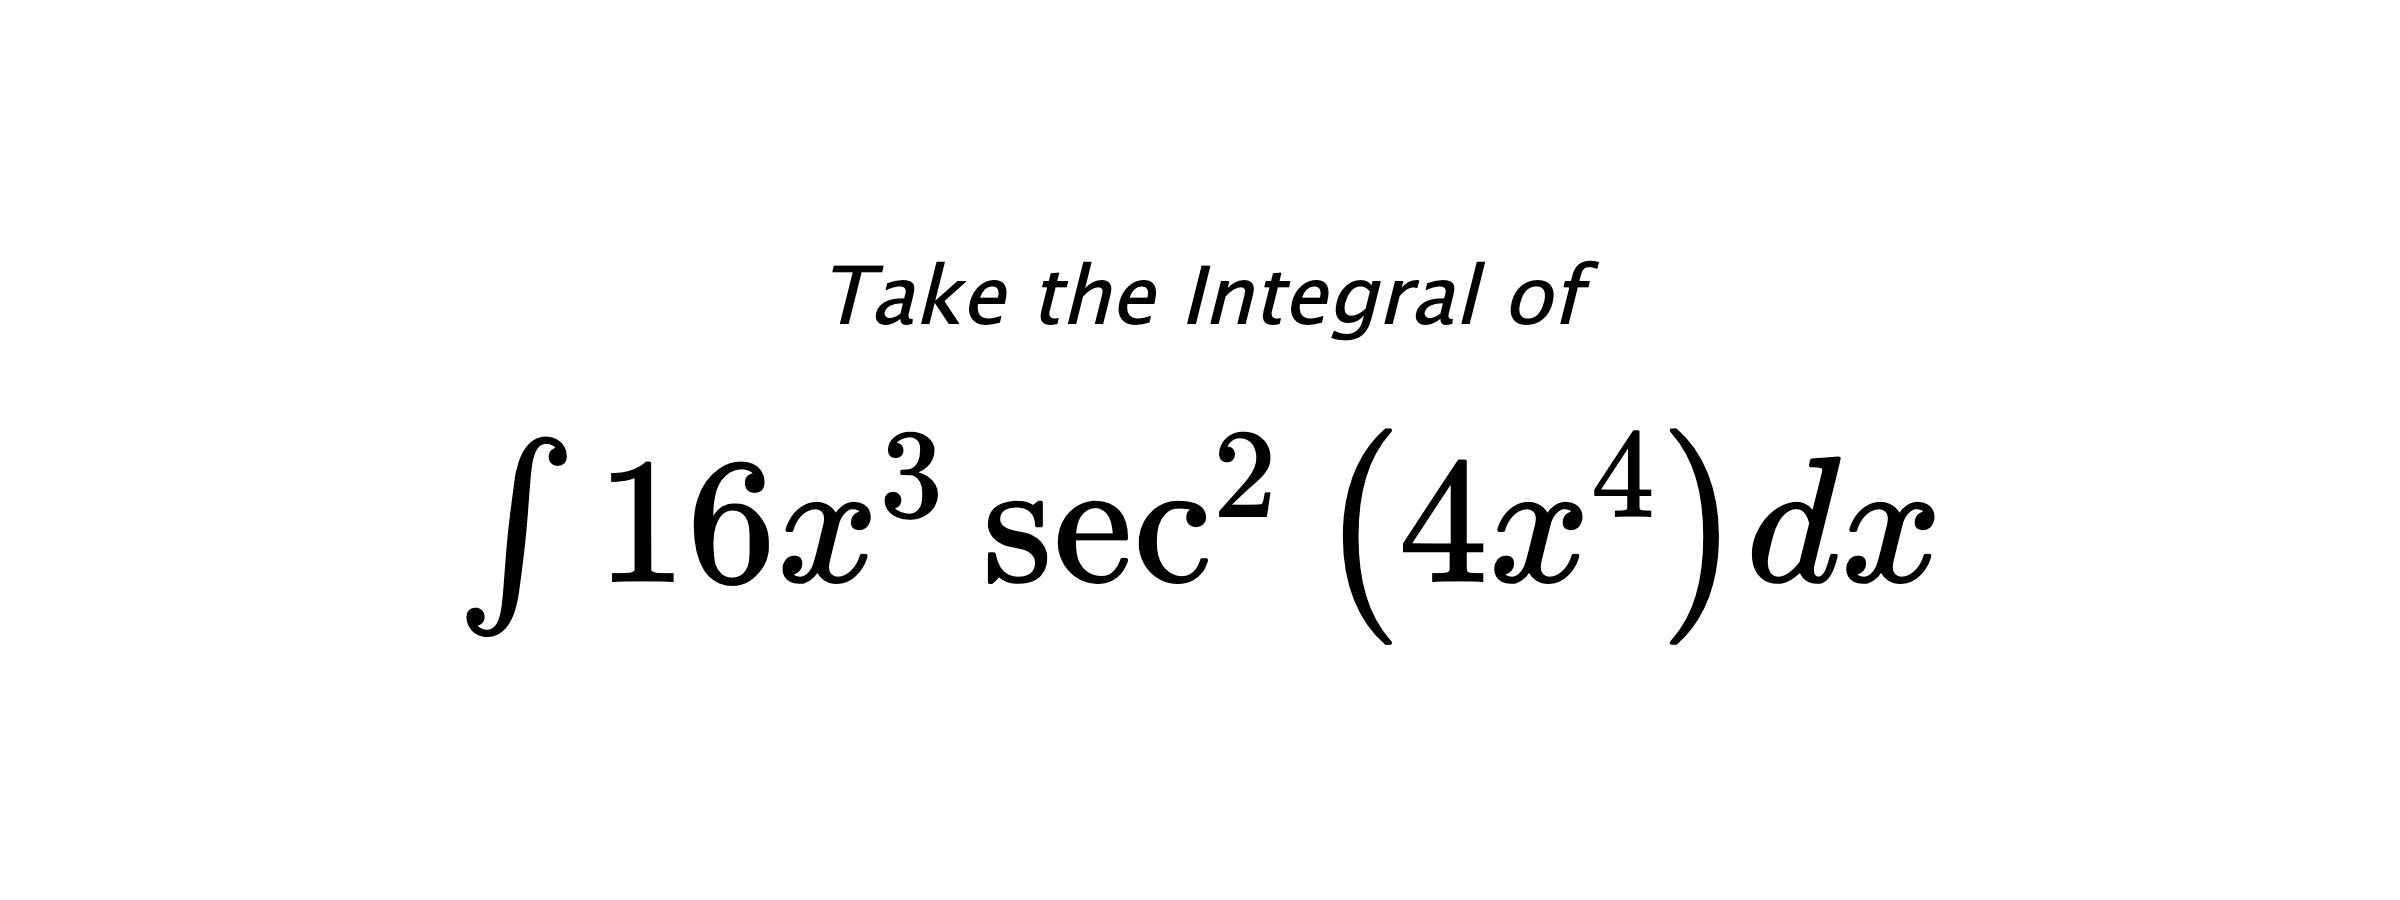 Take the Integral of $ \int 16 x^{3} \sec^{2}{\left(4 x^{4} \right)} dx $